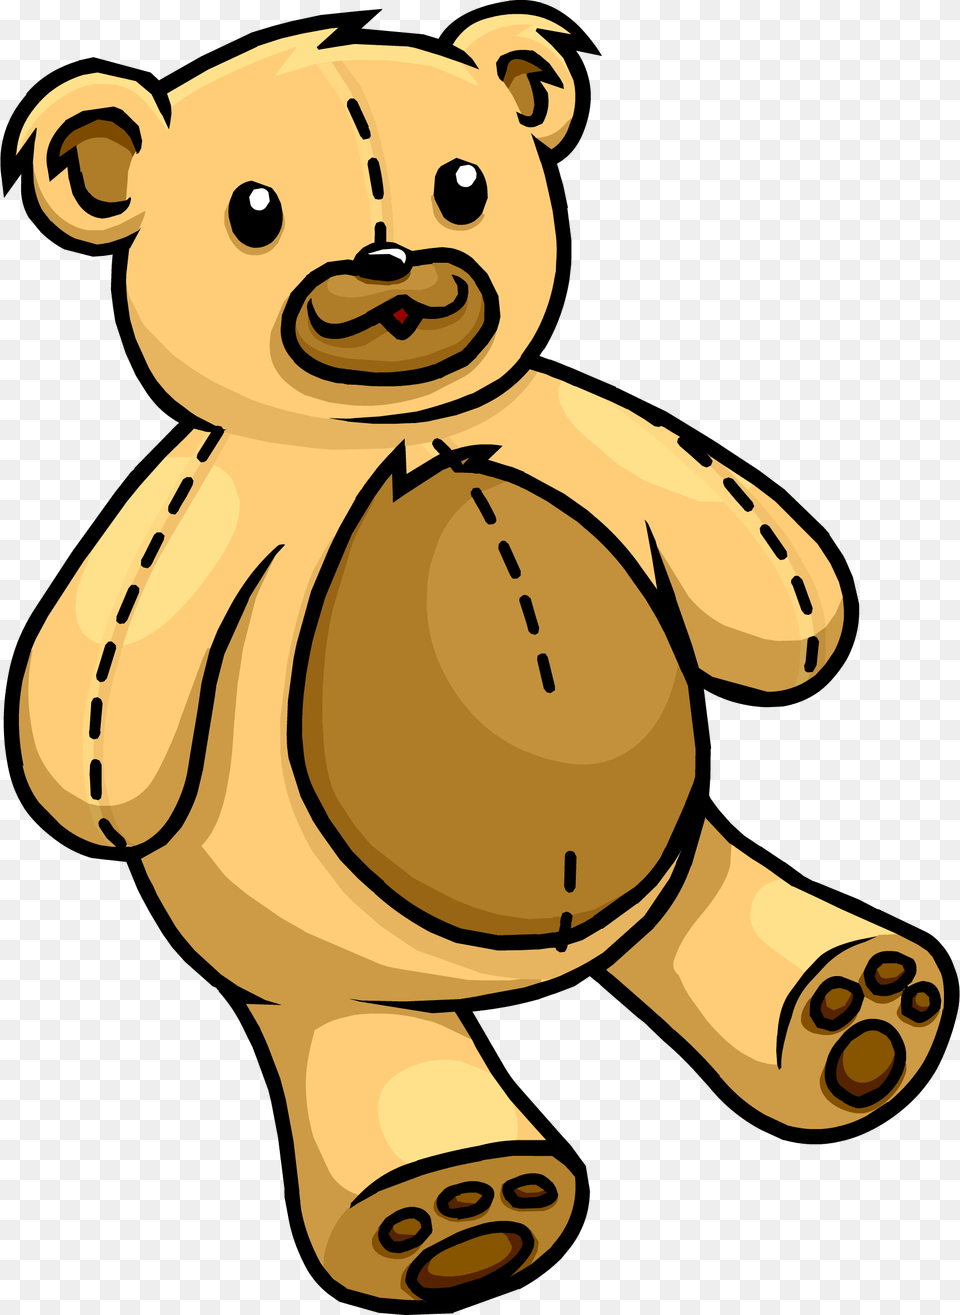 Club Sled Rewritten Wiki Club Penguin Rewritten Teddy, Teddy Bear, Toy, Nature, Outdoors Free Png